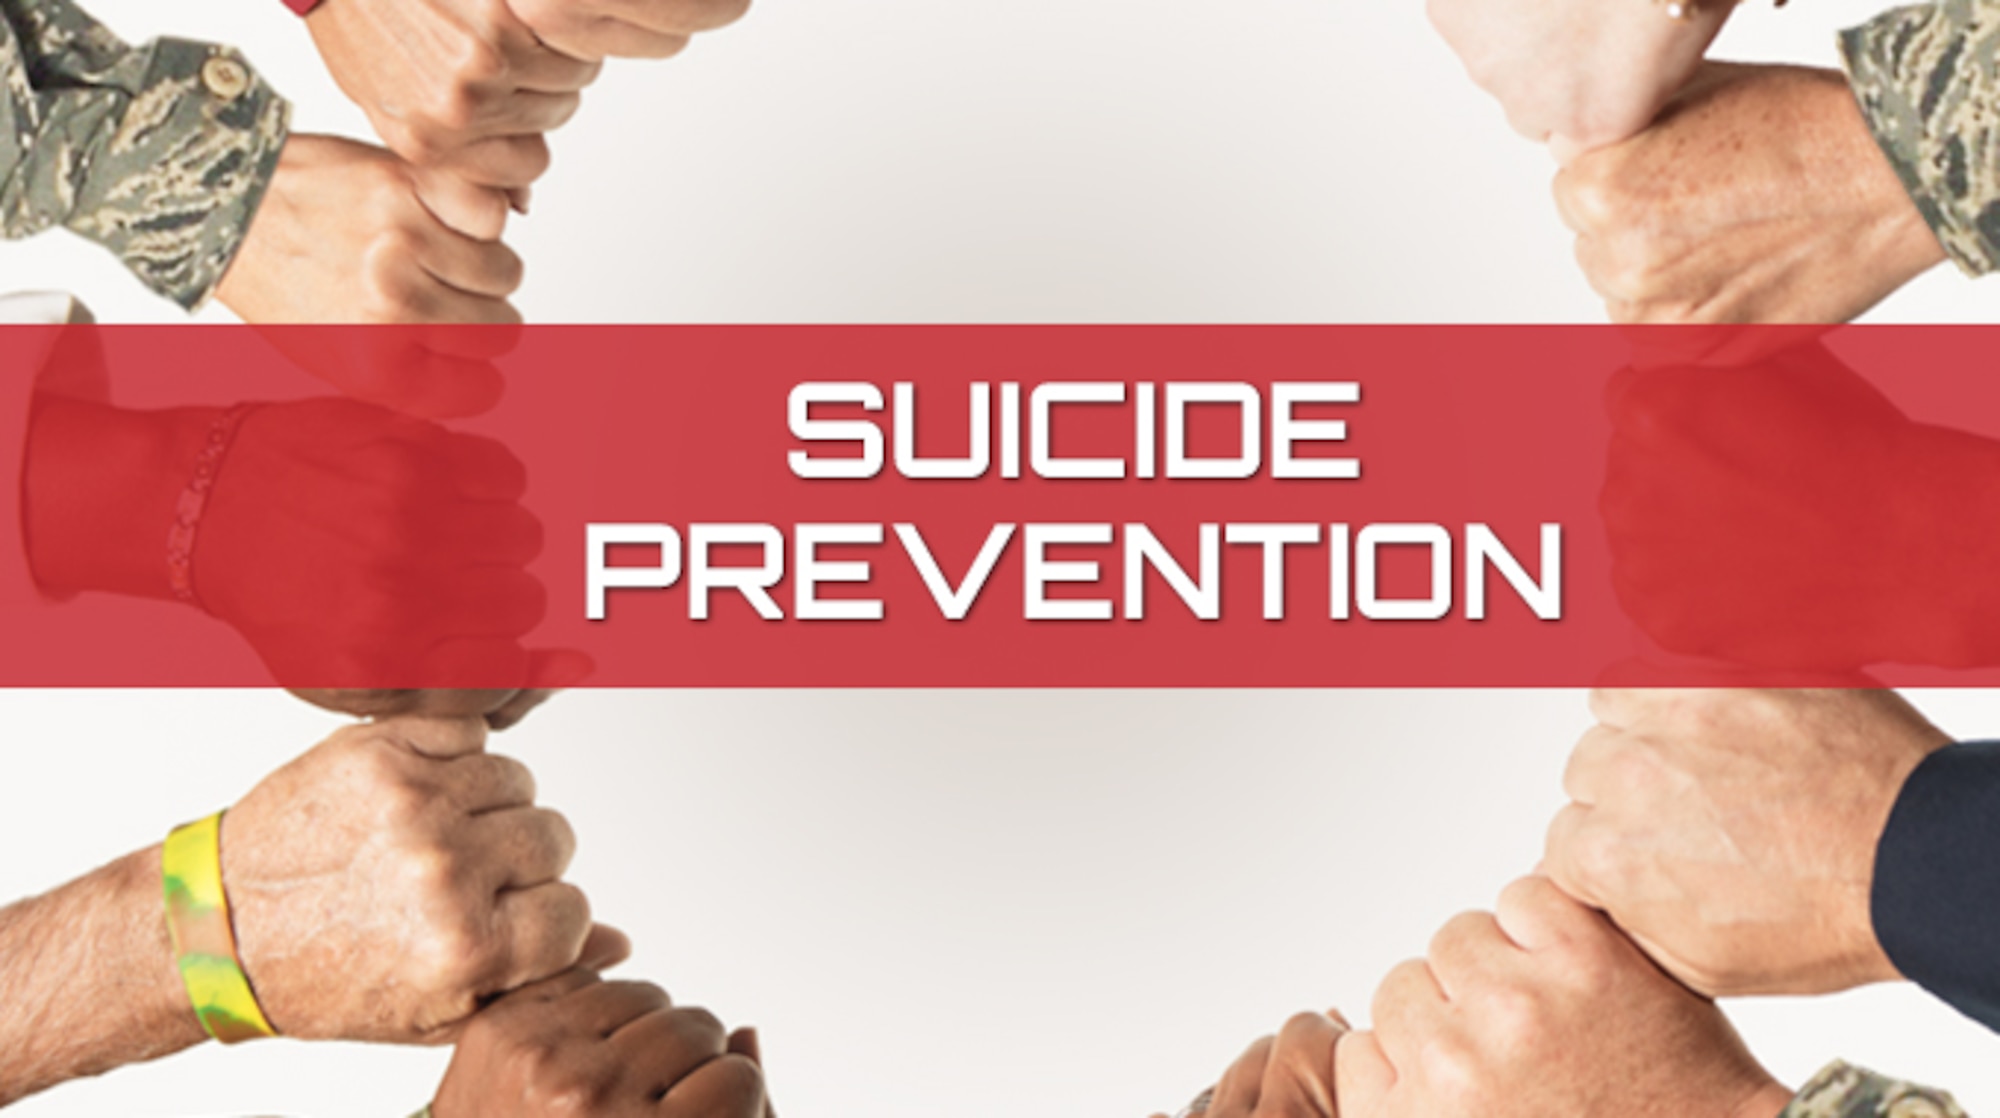 Suicide prevention is a task for all of us. Making a simple connection with the people around you can make a real difference in someone’s life if they are feeling alone.